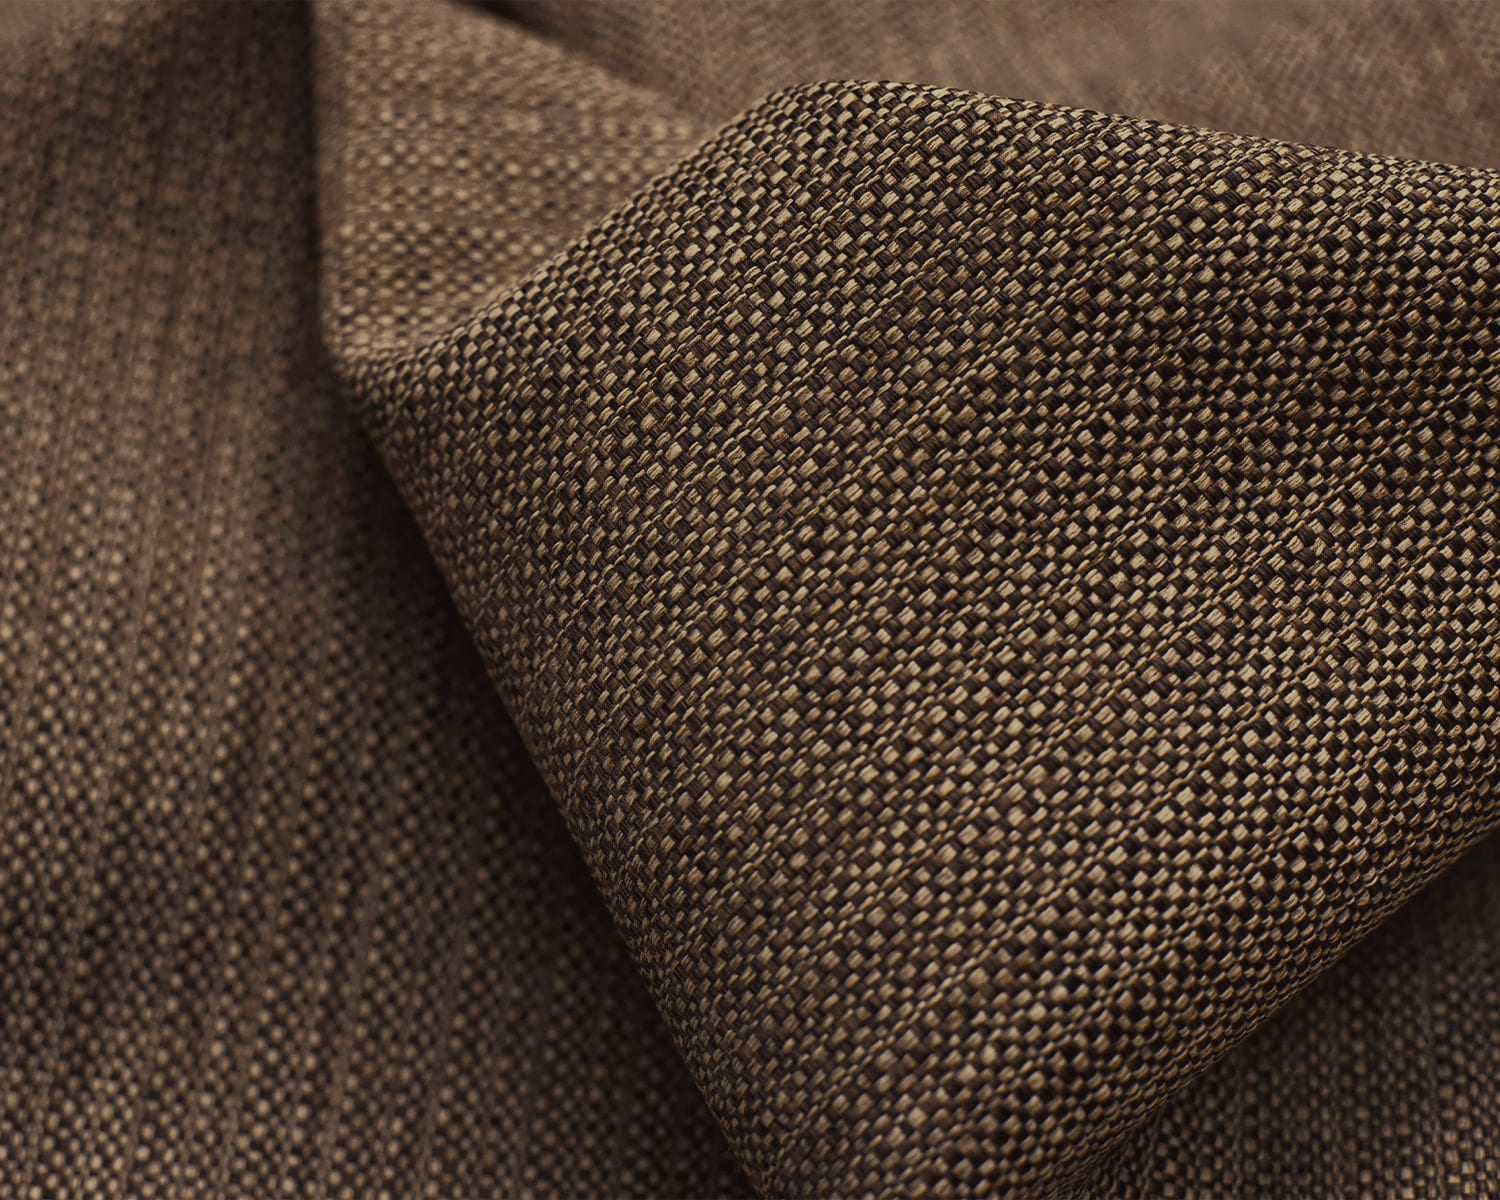 E703 Gold And Dark Brown Woven Geometric Upholstery Fabric